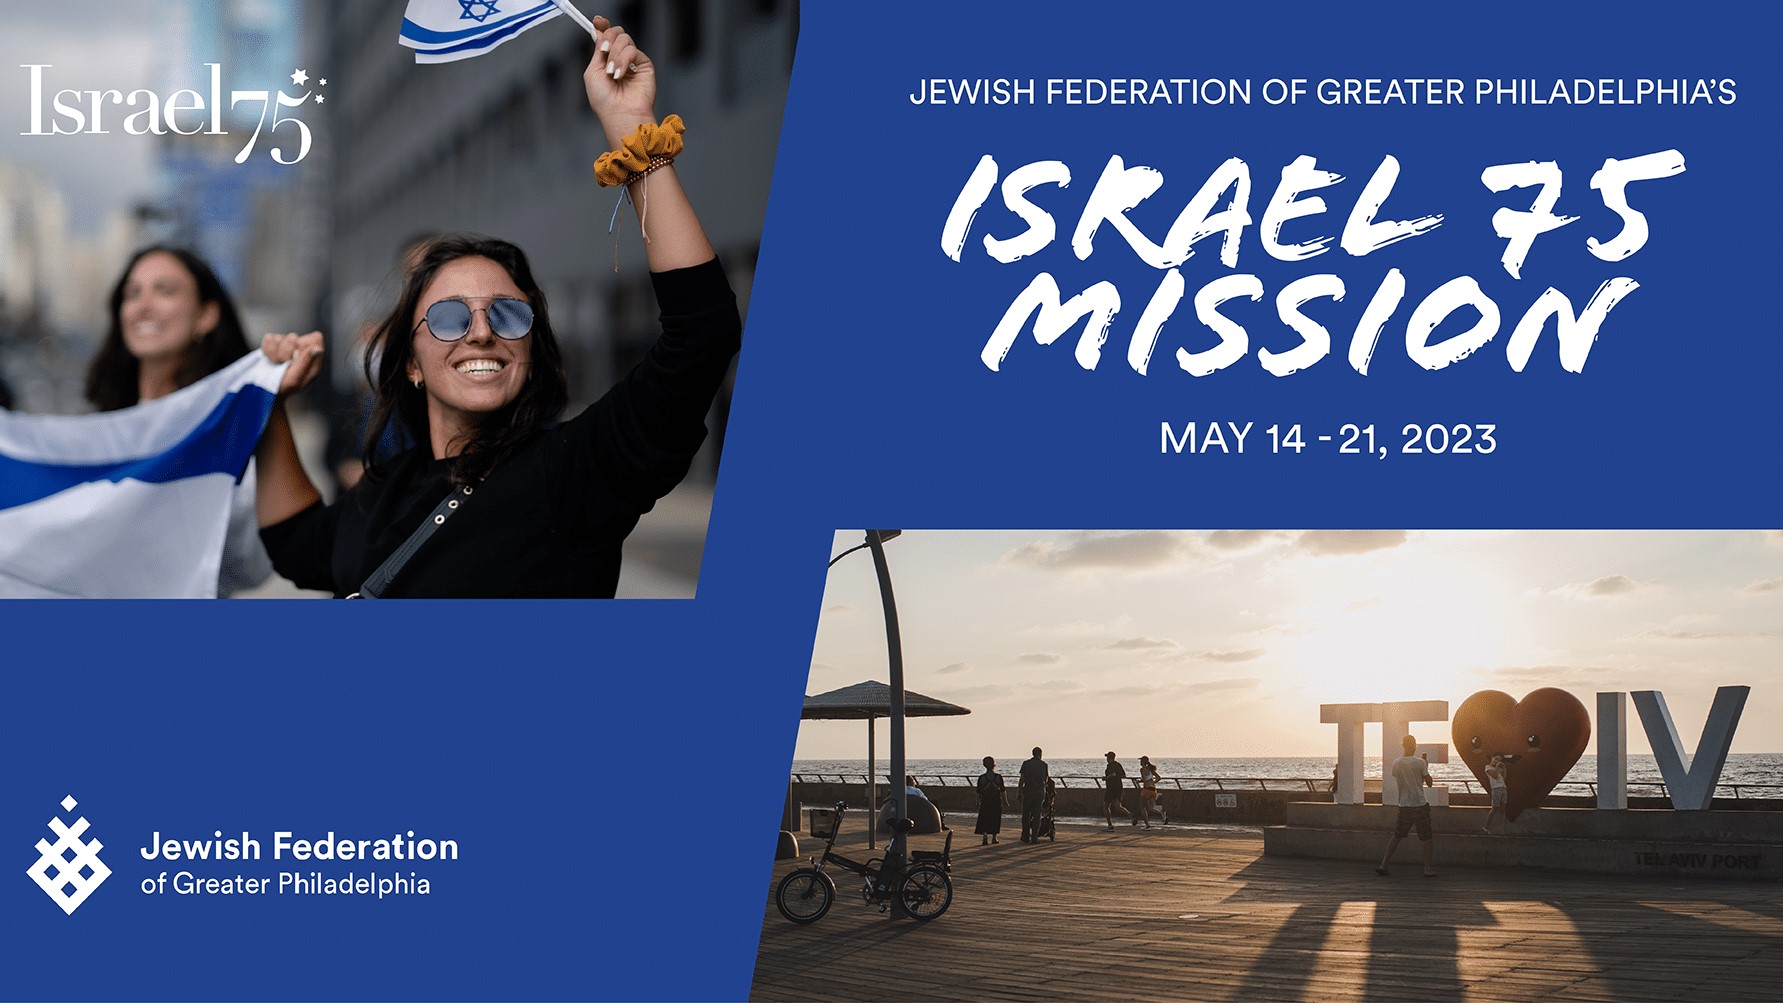 Next Year in Israel: The Jewish Federation Plans Community-Wide Mission for 75th Anniversary